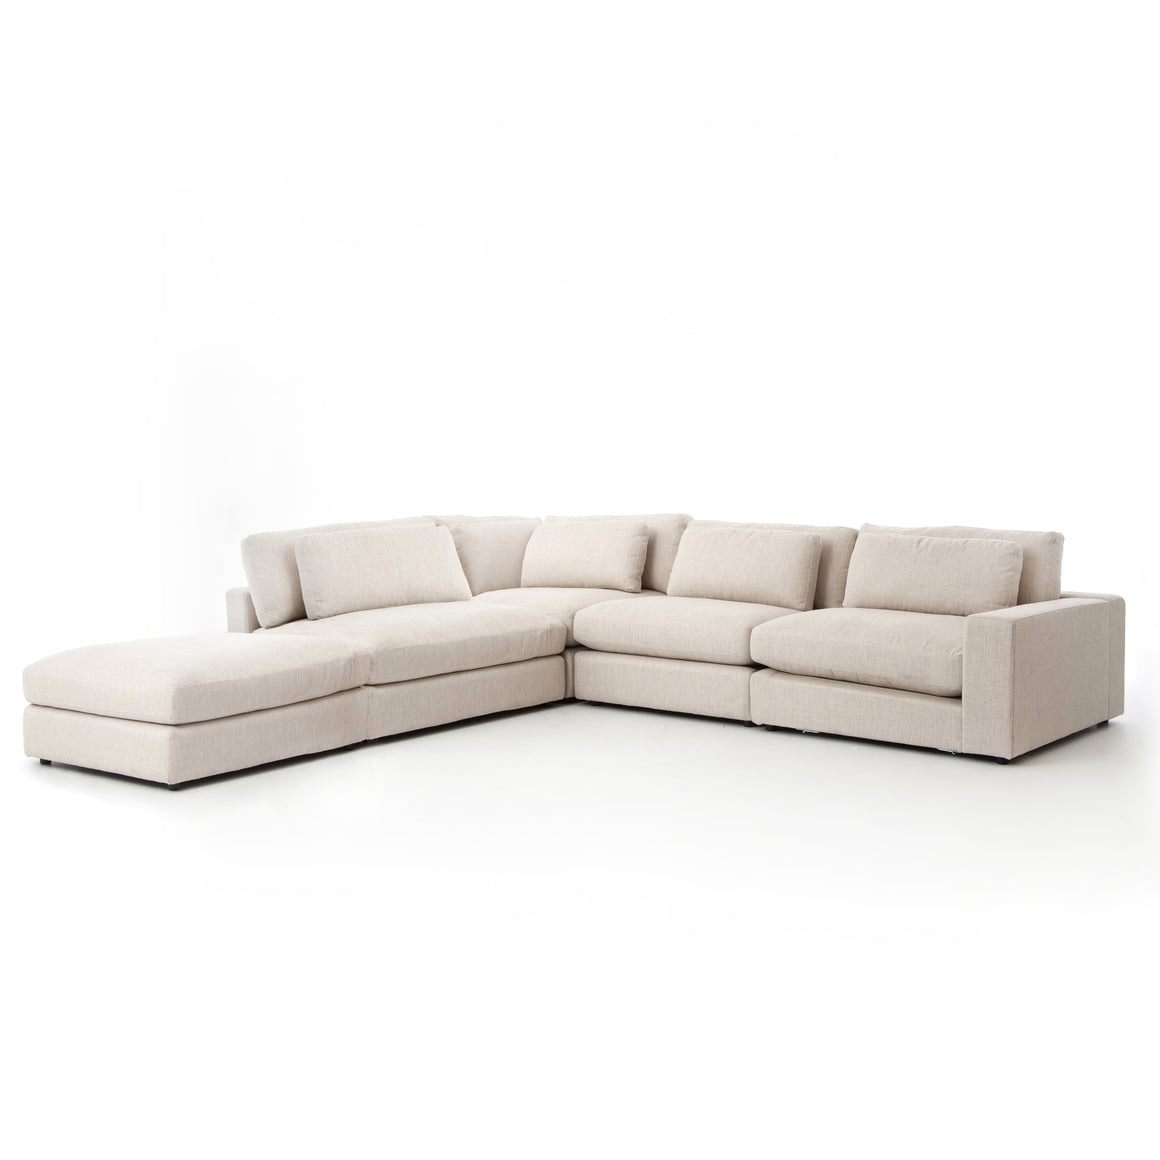 Bloor 4-Piece Right Arm Facing Sectional With Ottoman - Essence Natural